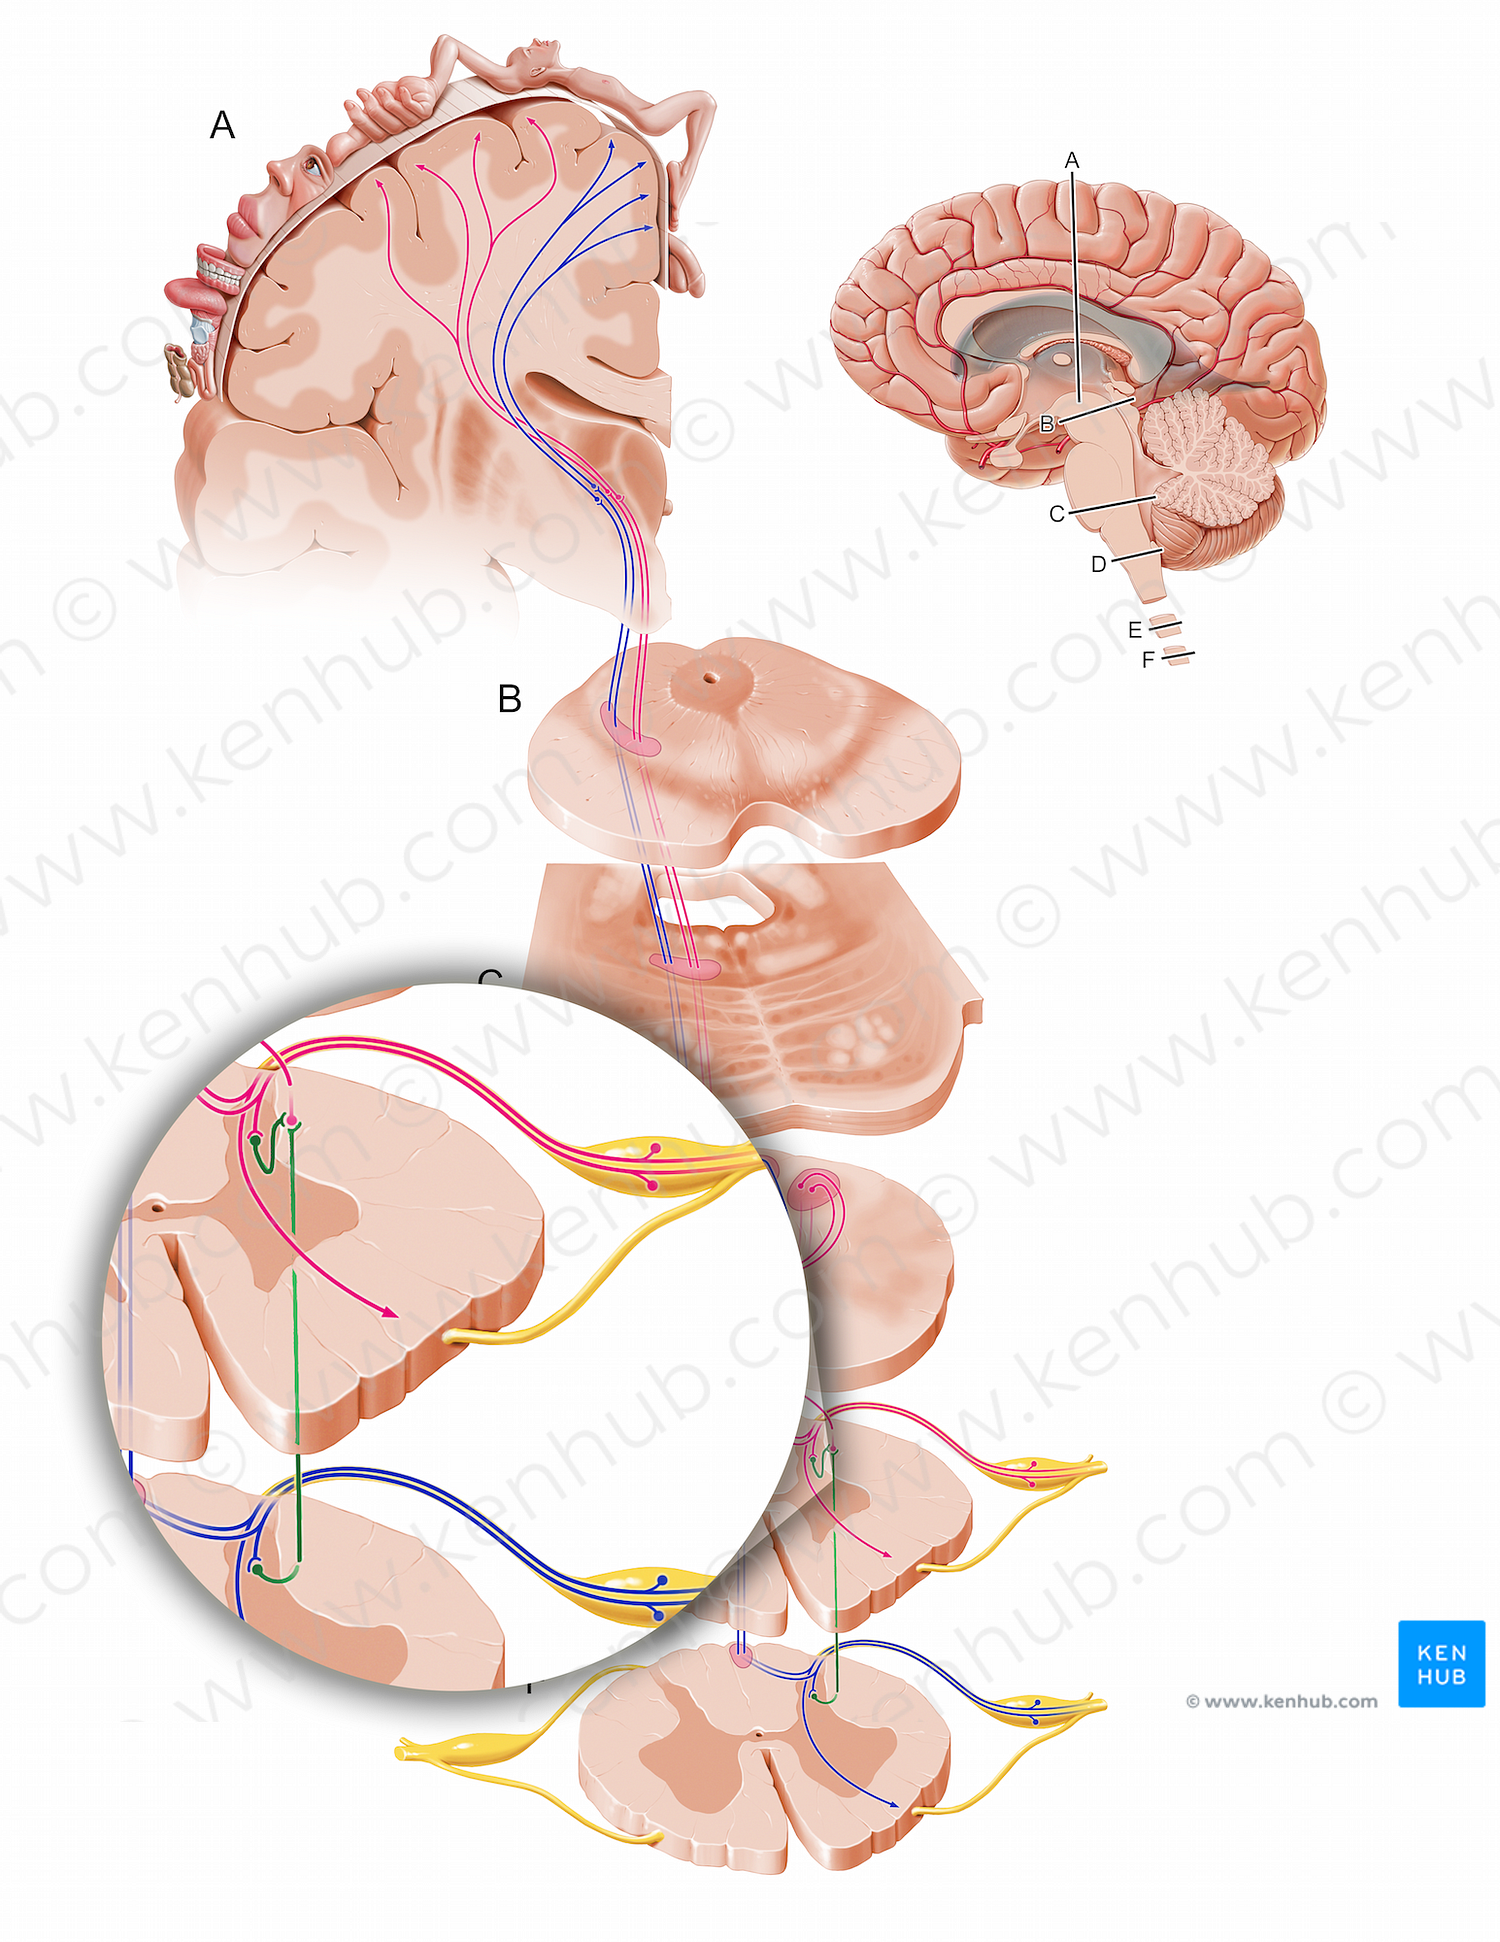 Spinocervical tract (#12100)